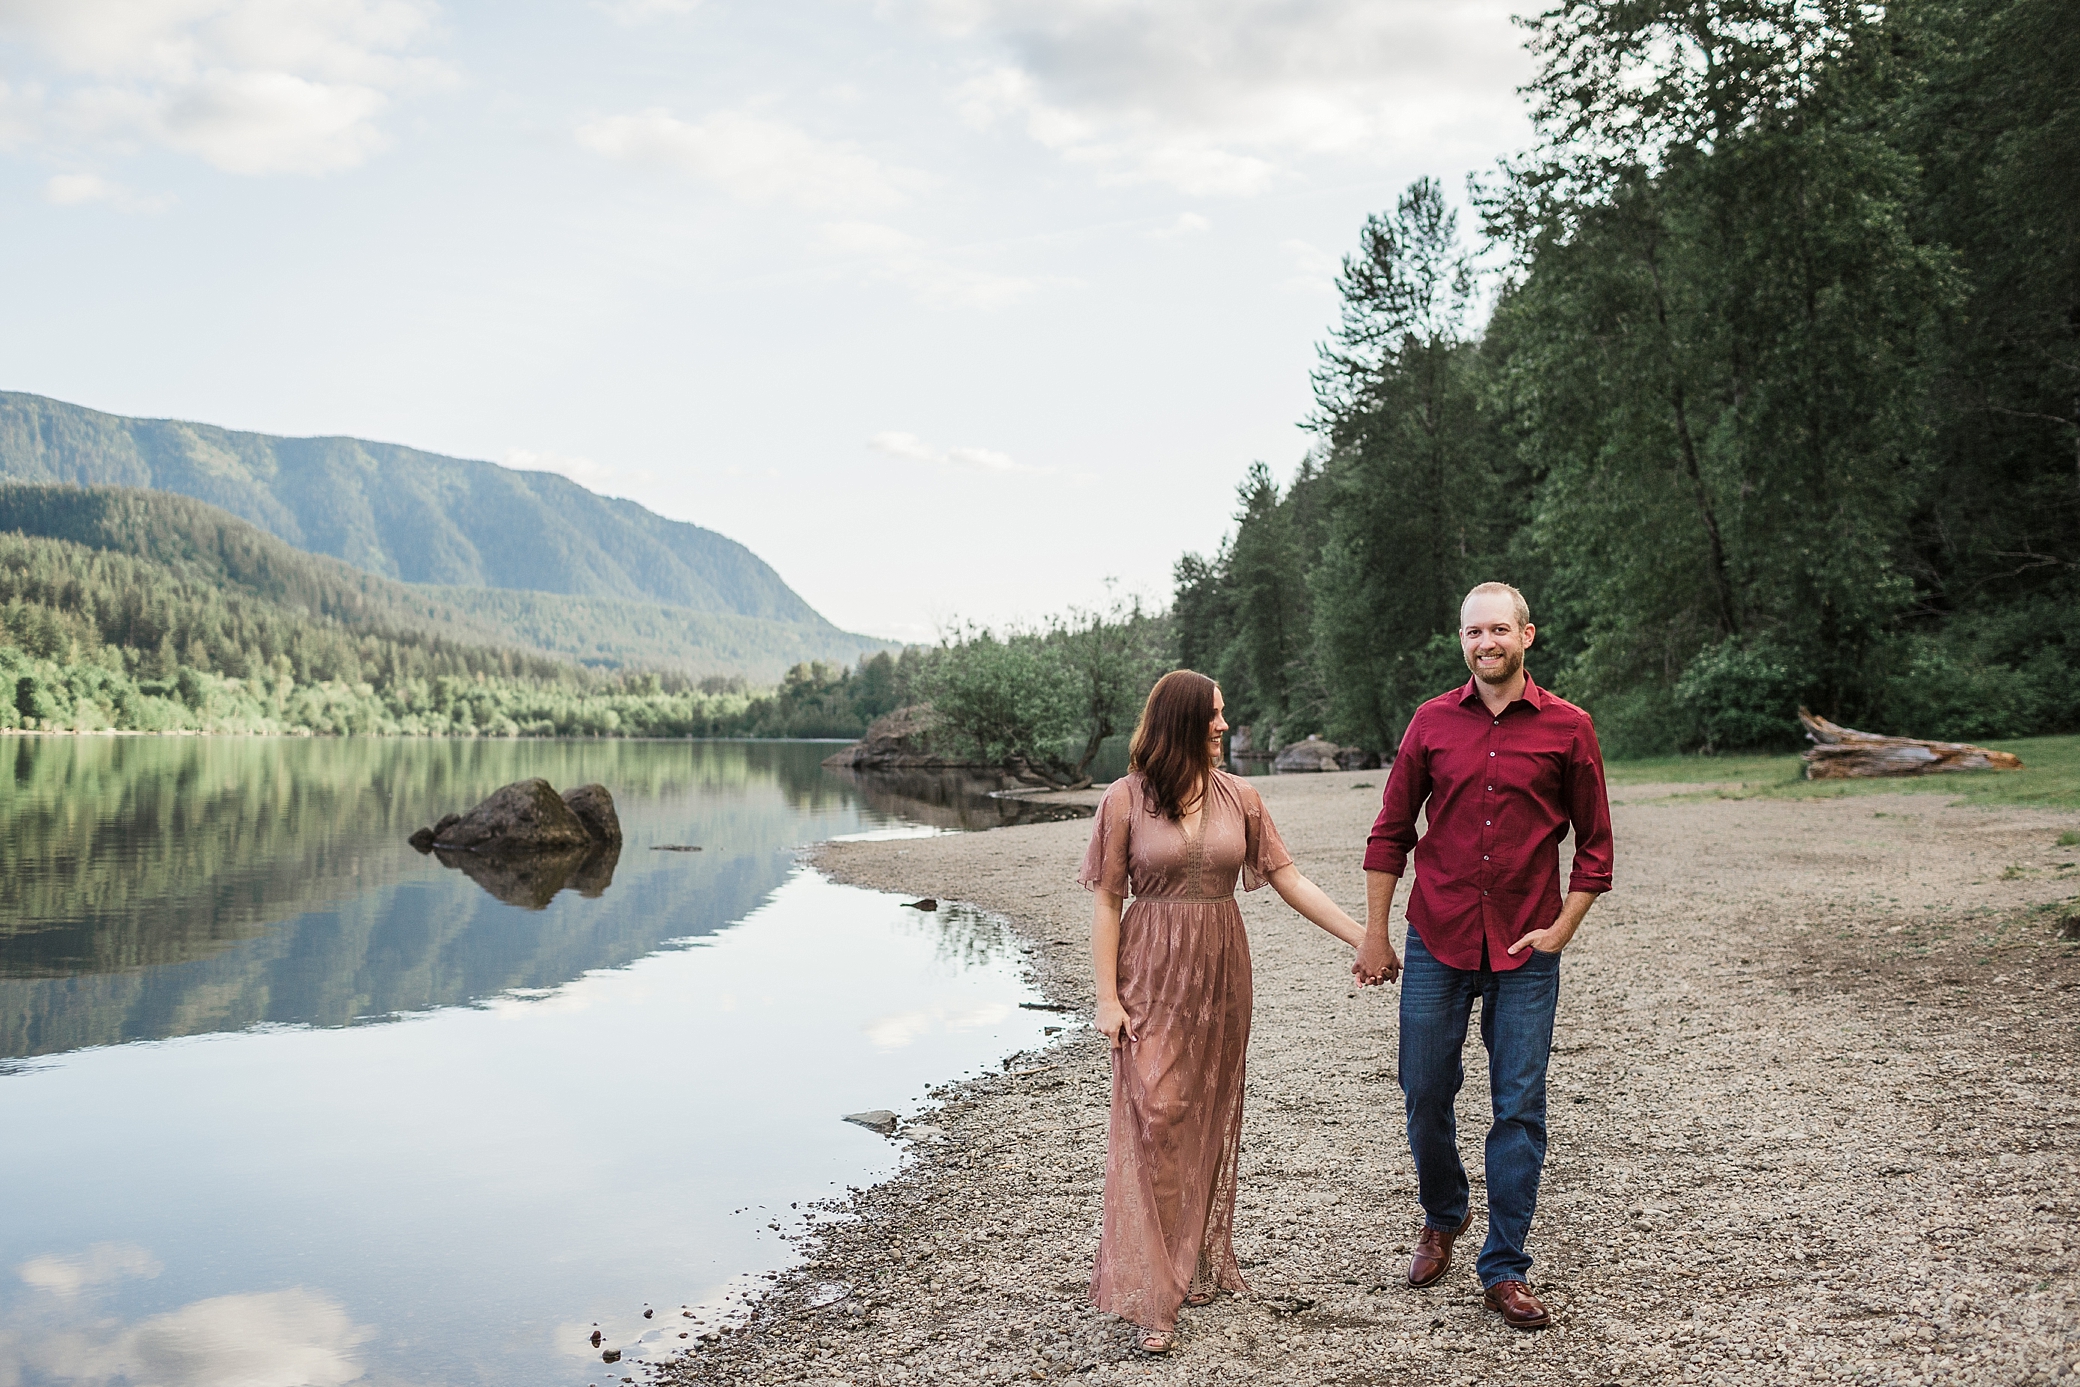 Summer engagement session at Rattlesnake Lake in North Bend, WA. Photographed by Snoqualmie Wedding Photographer, Megan Montalvo Photography